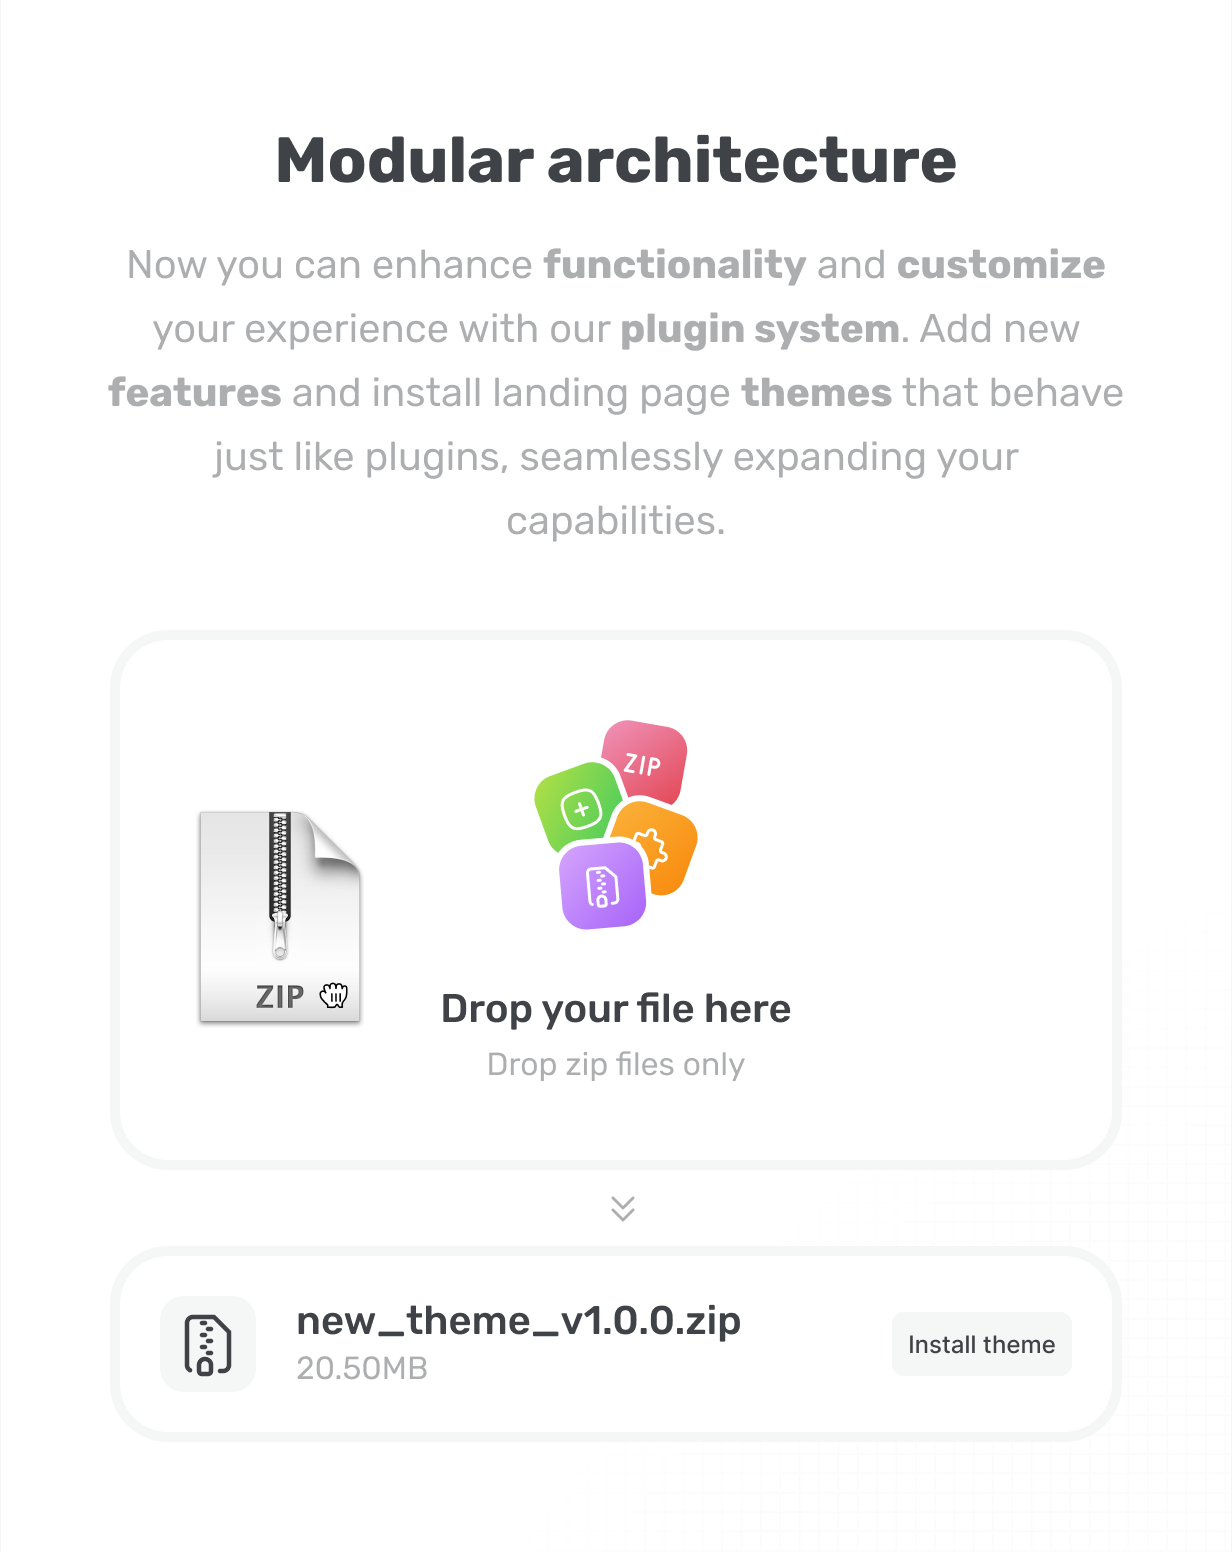 Modular Architecture Add new features and install landing page themes that behave just like plugins aikeedo @heyaikeedo